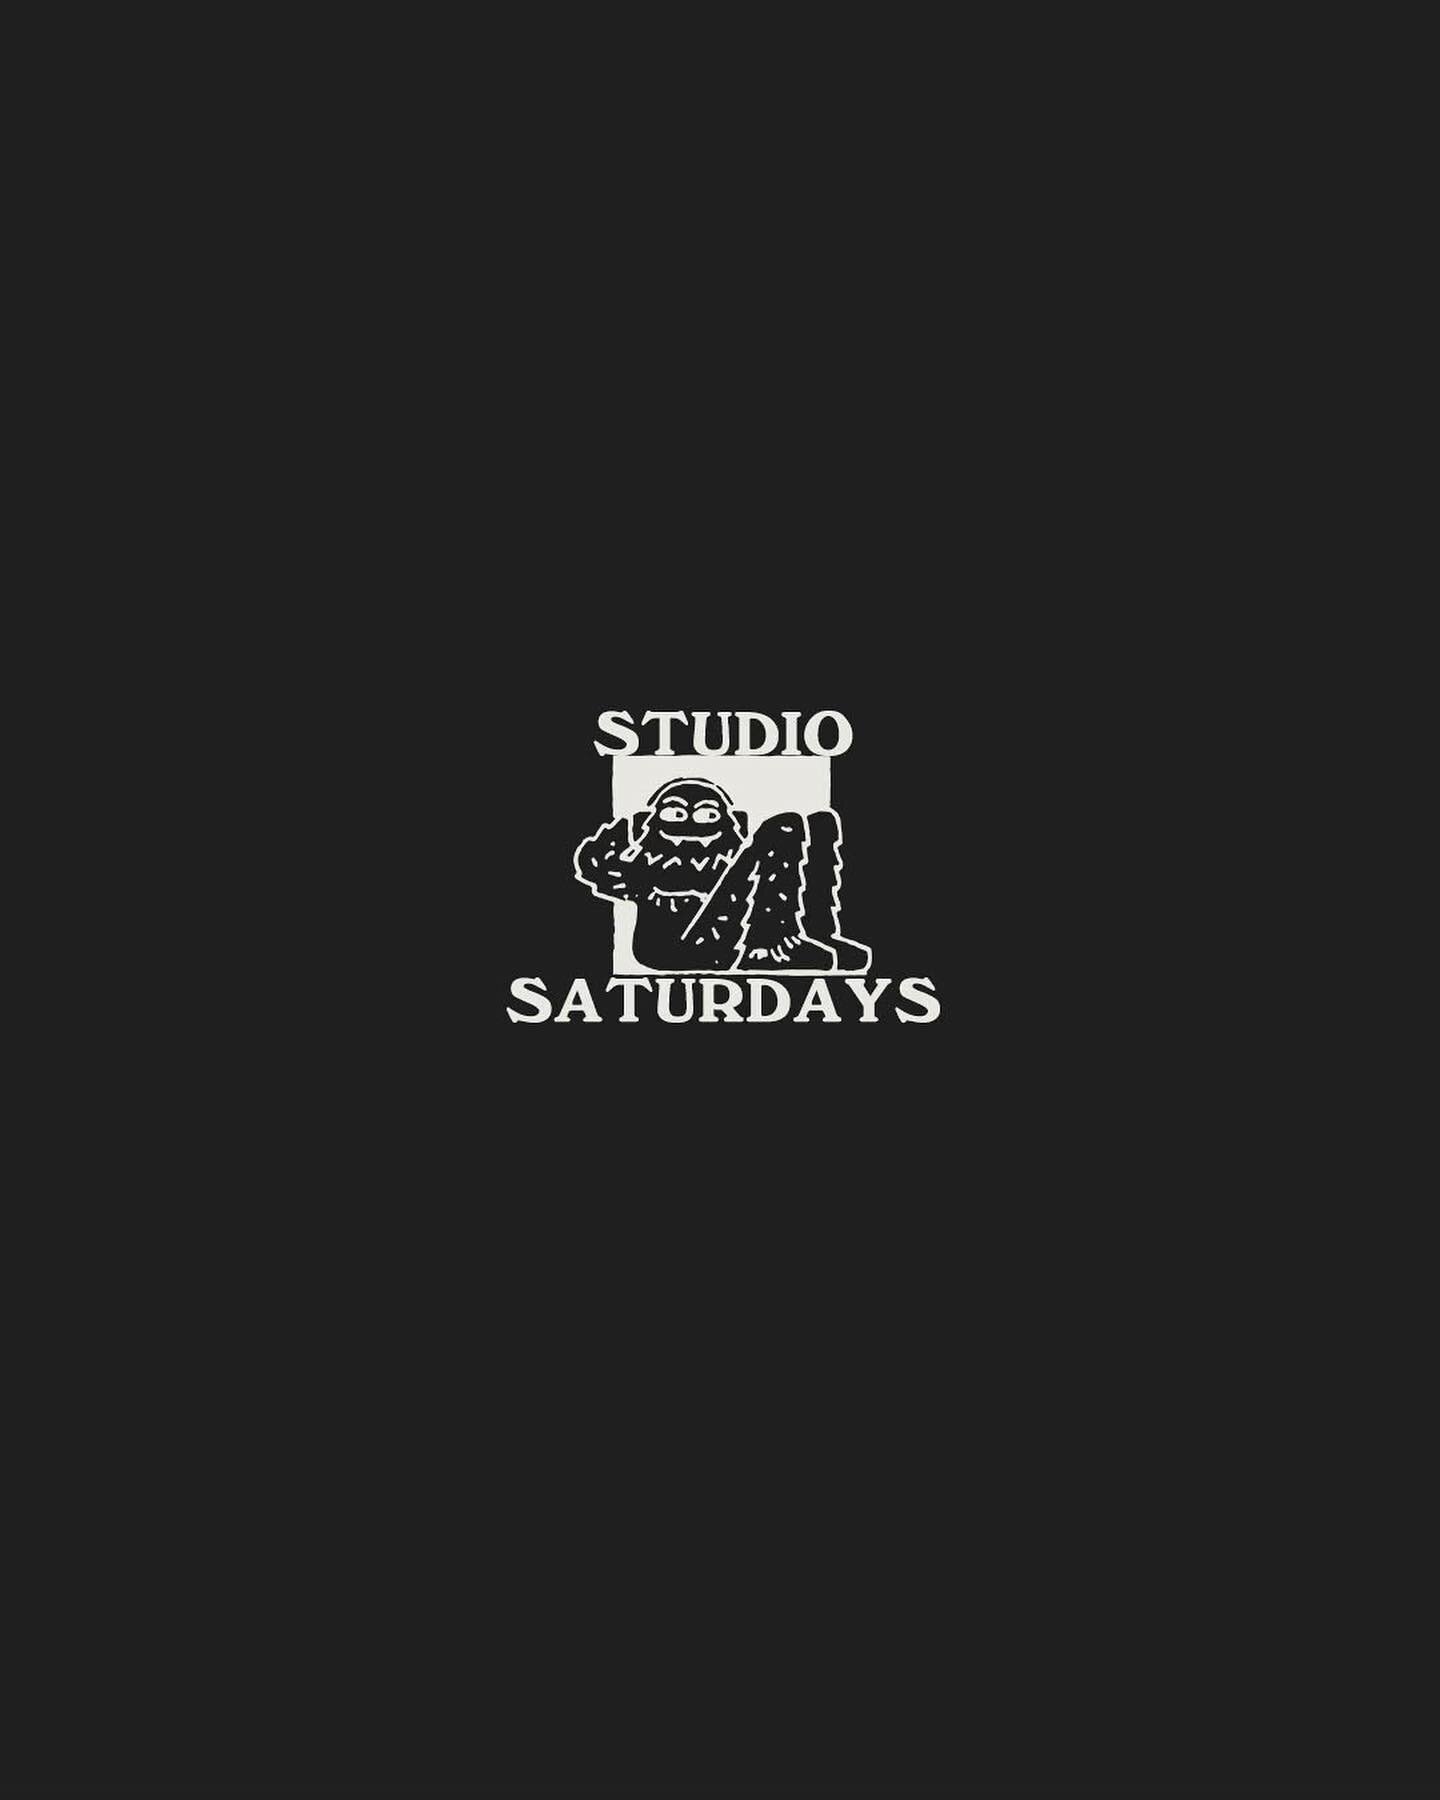 Brooklyn! @bkyardboogie is back home with Studio Saturdays - April 29th!

Swipe 👉for details!

The goal of this series is to bring together creatives from across disciplines to hang, and take some portraits with the co-founder/resident photographer 